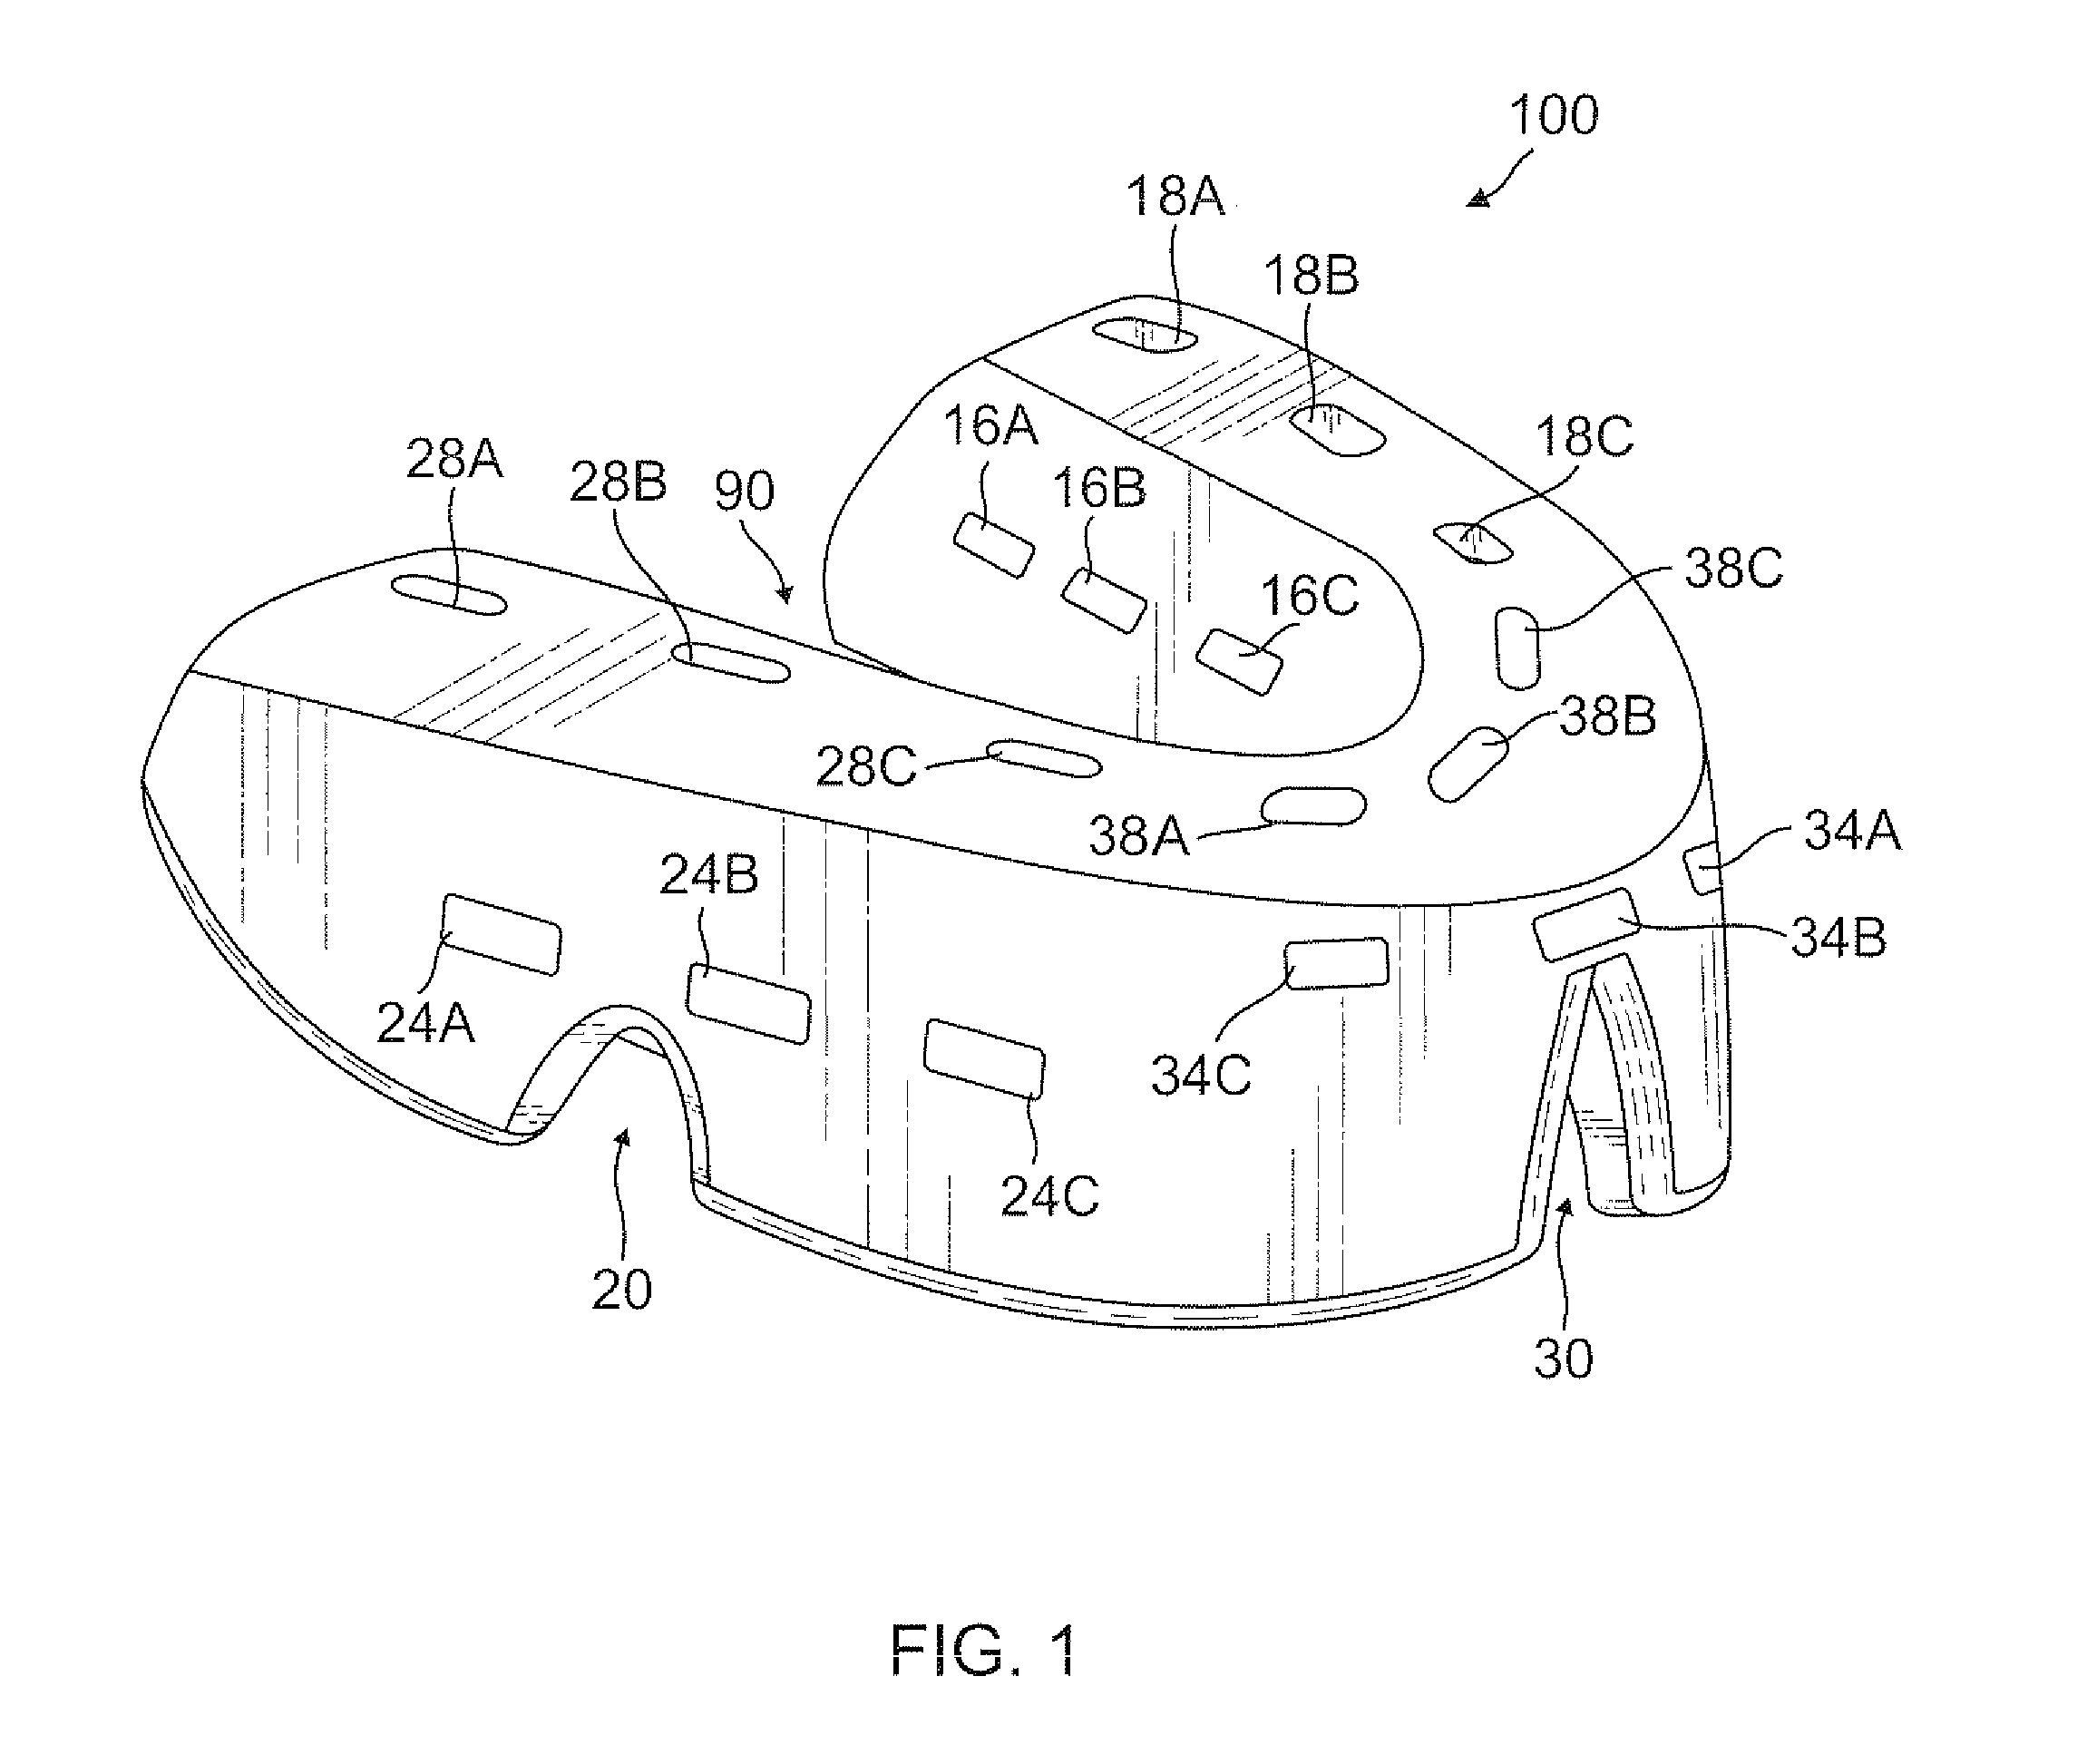 Mouthguard having breathing cavities and breathing holes incorporated into the body of the mouthguard